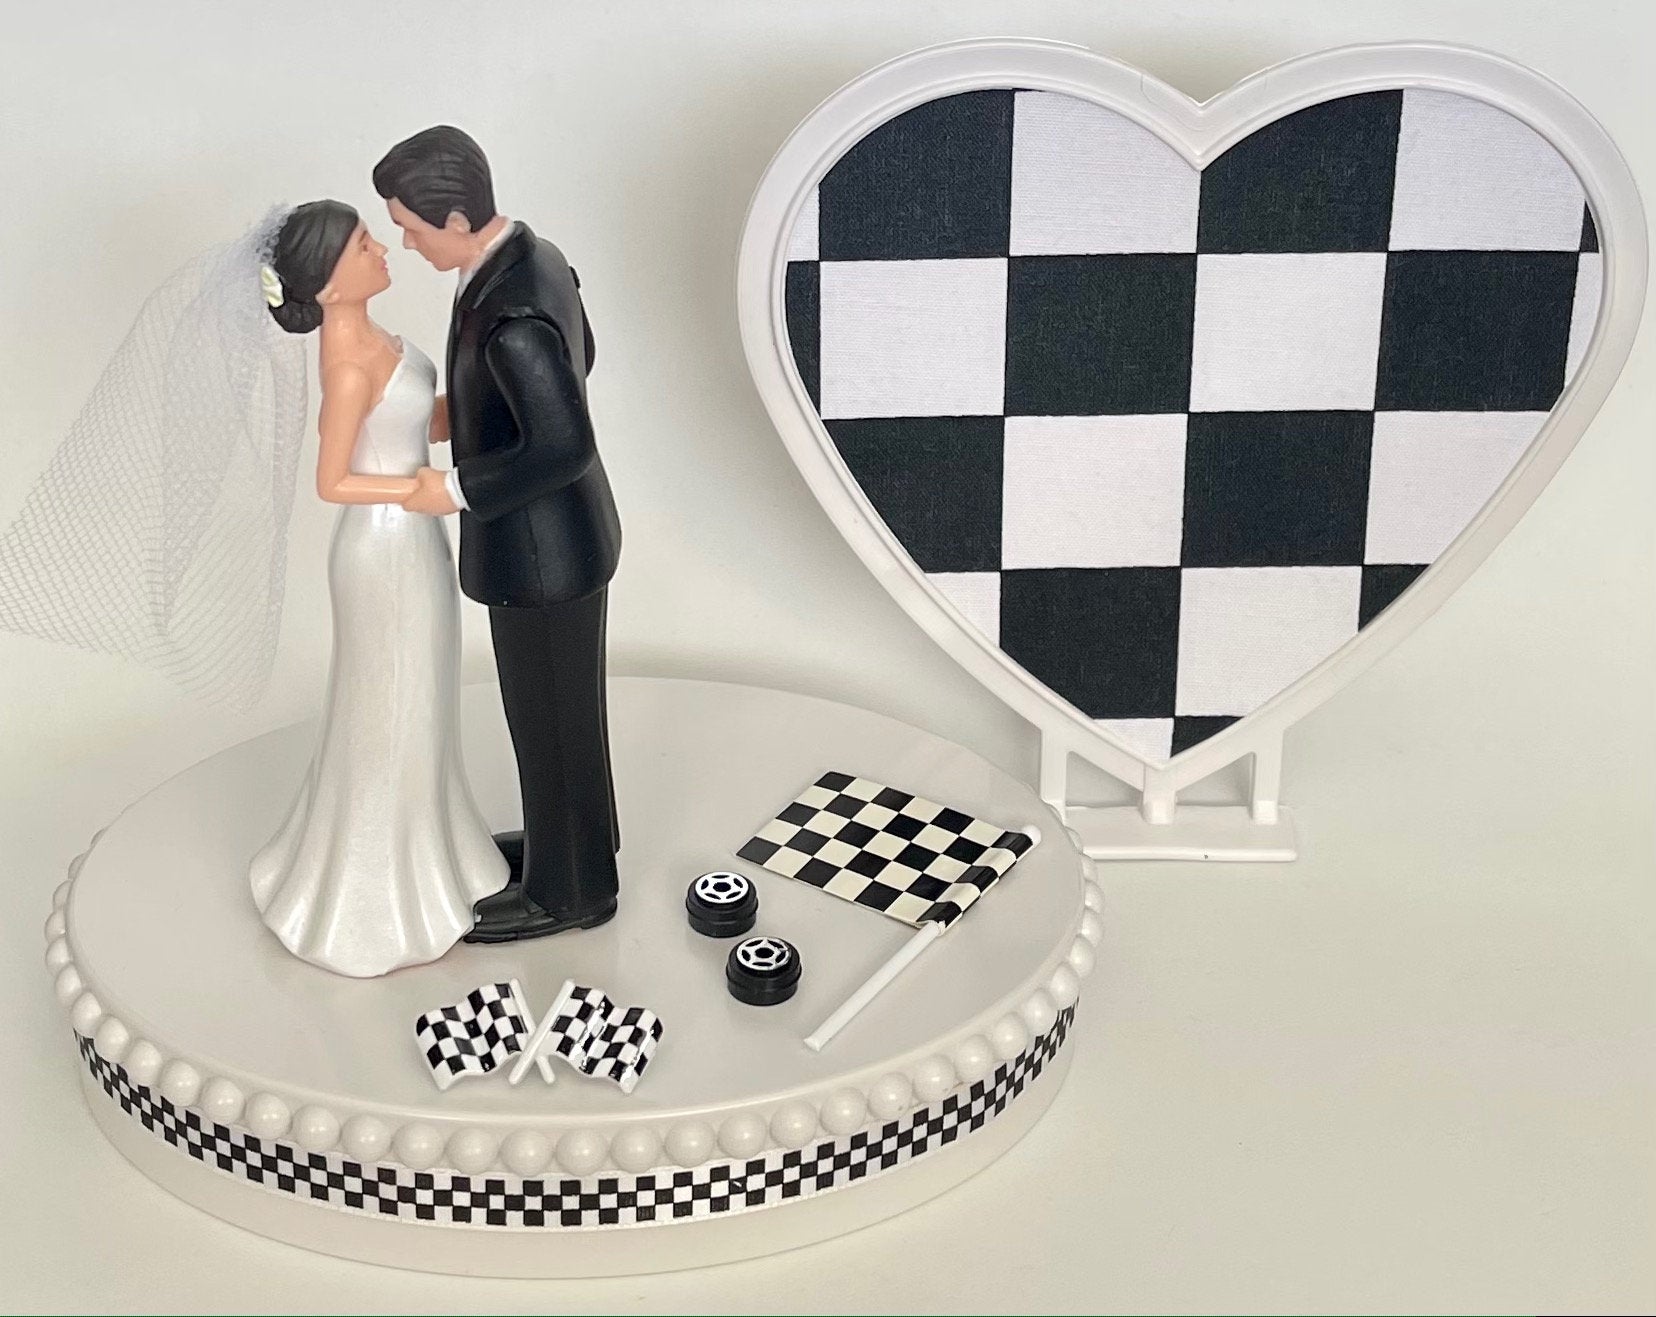 Wedding Cake Topper Checkered Flag Themed Auto Car Motorcycle Racing Sports Fan Pretty Short-Haired Bride Groom Bridal Shower Reception Gift